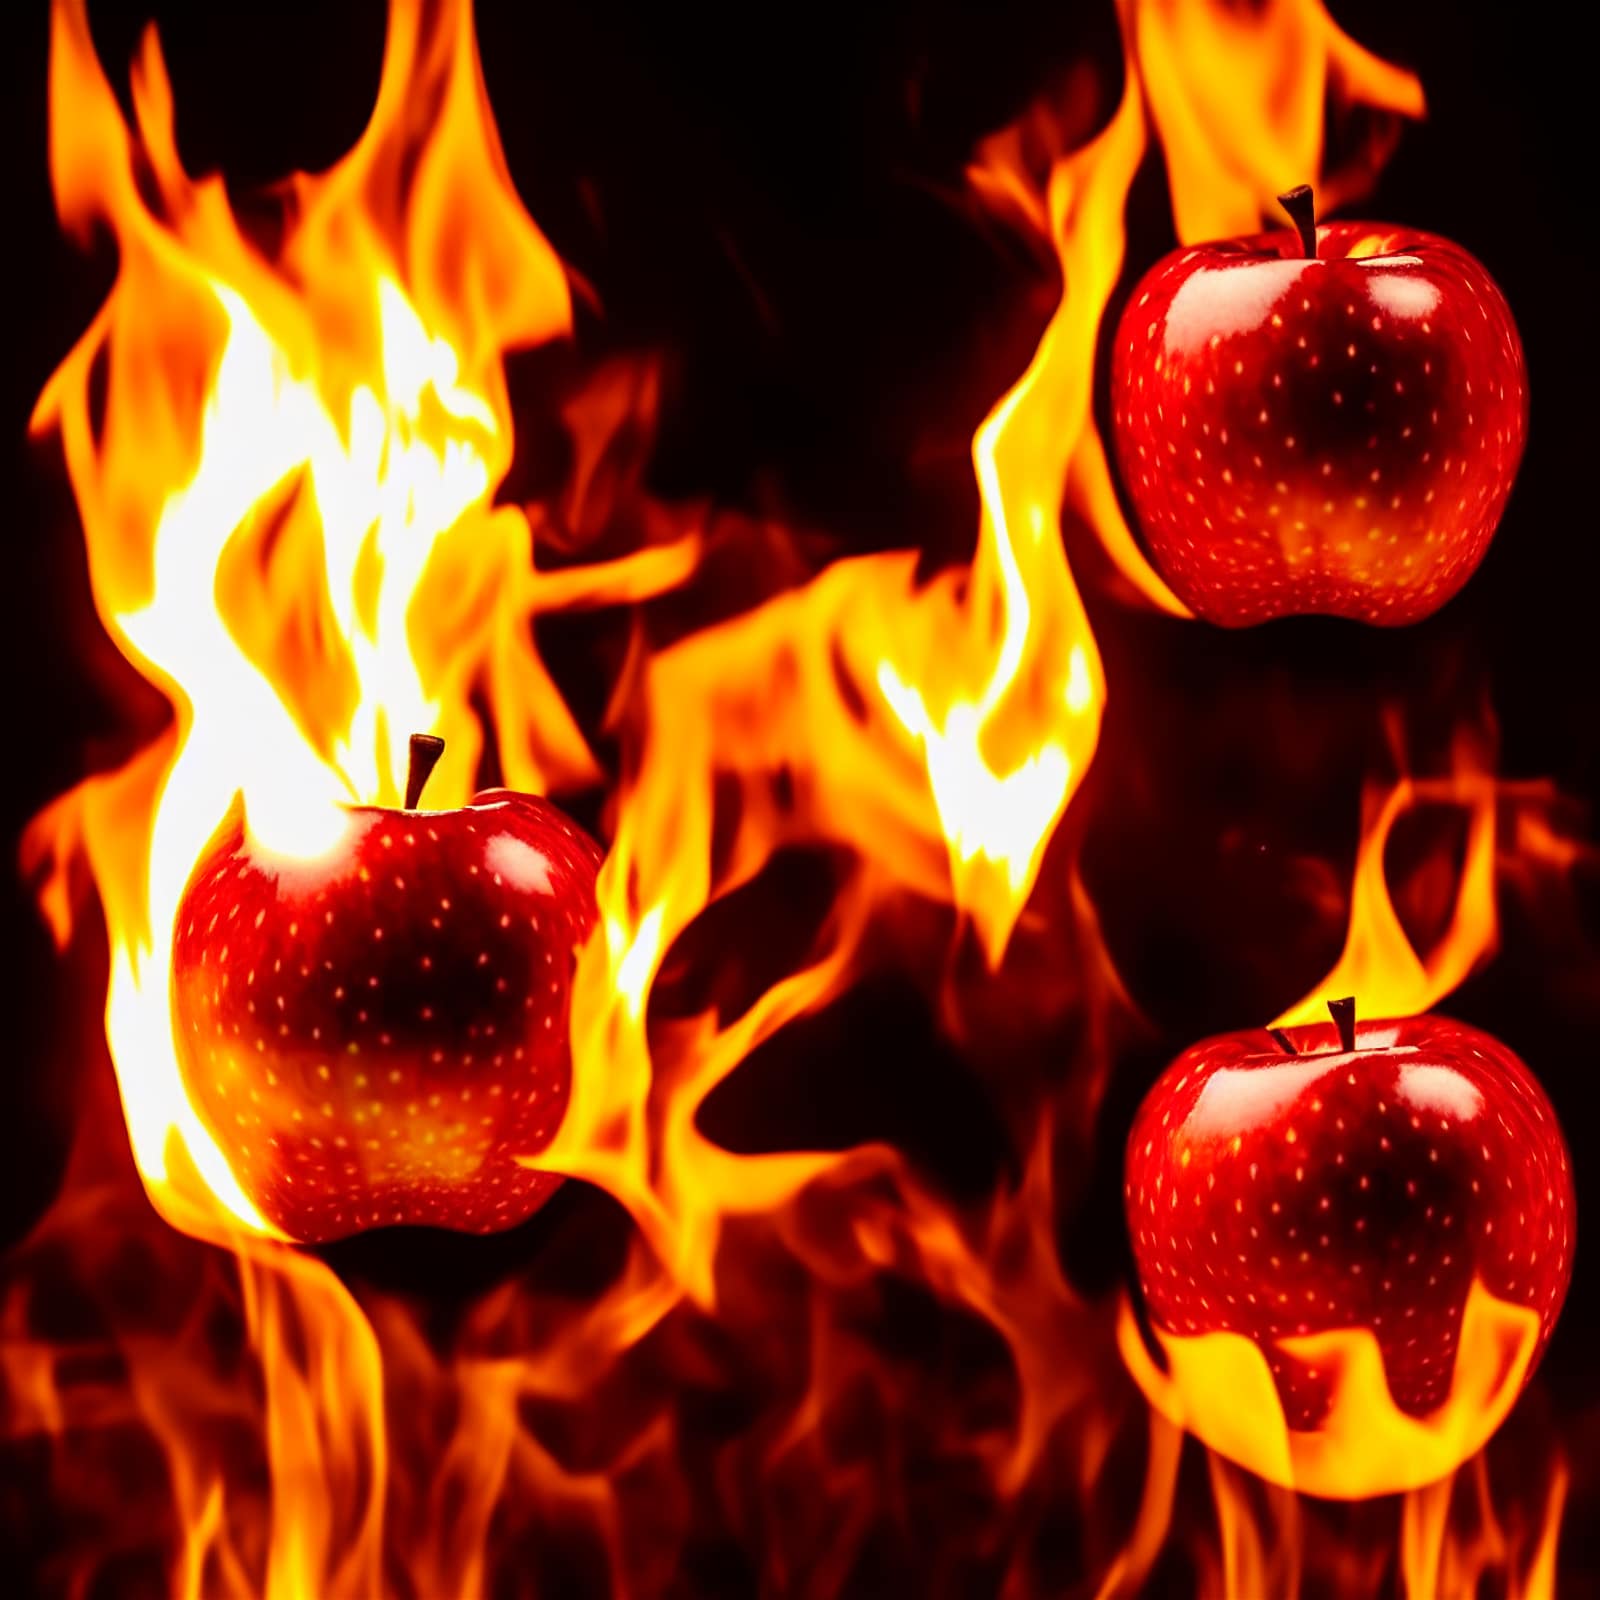 flaming apple 2 - Radio Clash Podcast Greedy Apple Radio Clash Music Mashup Podcast brings you the best in eclectic tunes, mashups and remixes from around the world. Since 2004, we've been bringing you the freshest and most innovative music from a diverse range of genres and cultures. Join us on our musical journey as we explore the sounds of yesterday, today, and tomorrow. Discover new music and be inspired by the mashup of musical styles that only Radio Clash can provide. Subscribe now to elevate your musical experience!